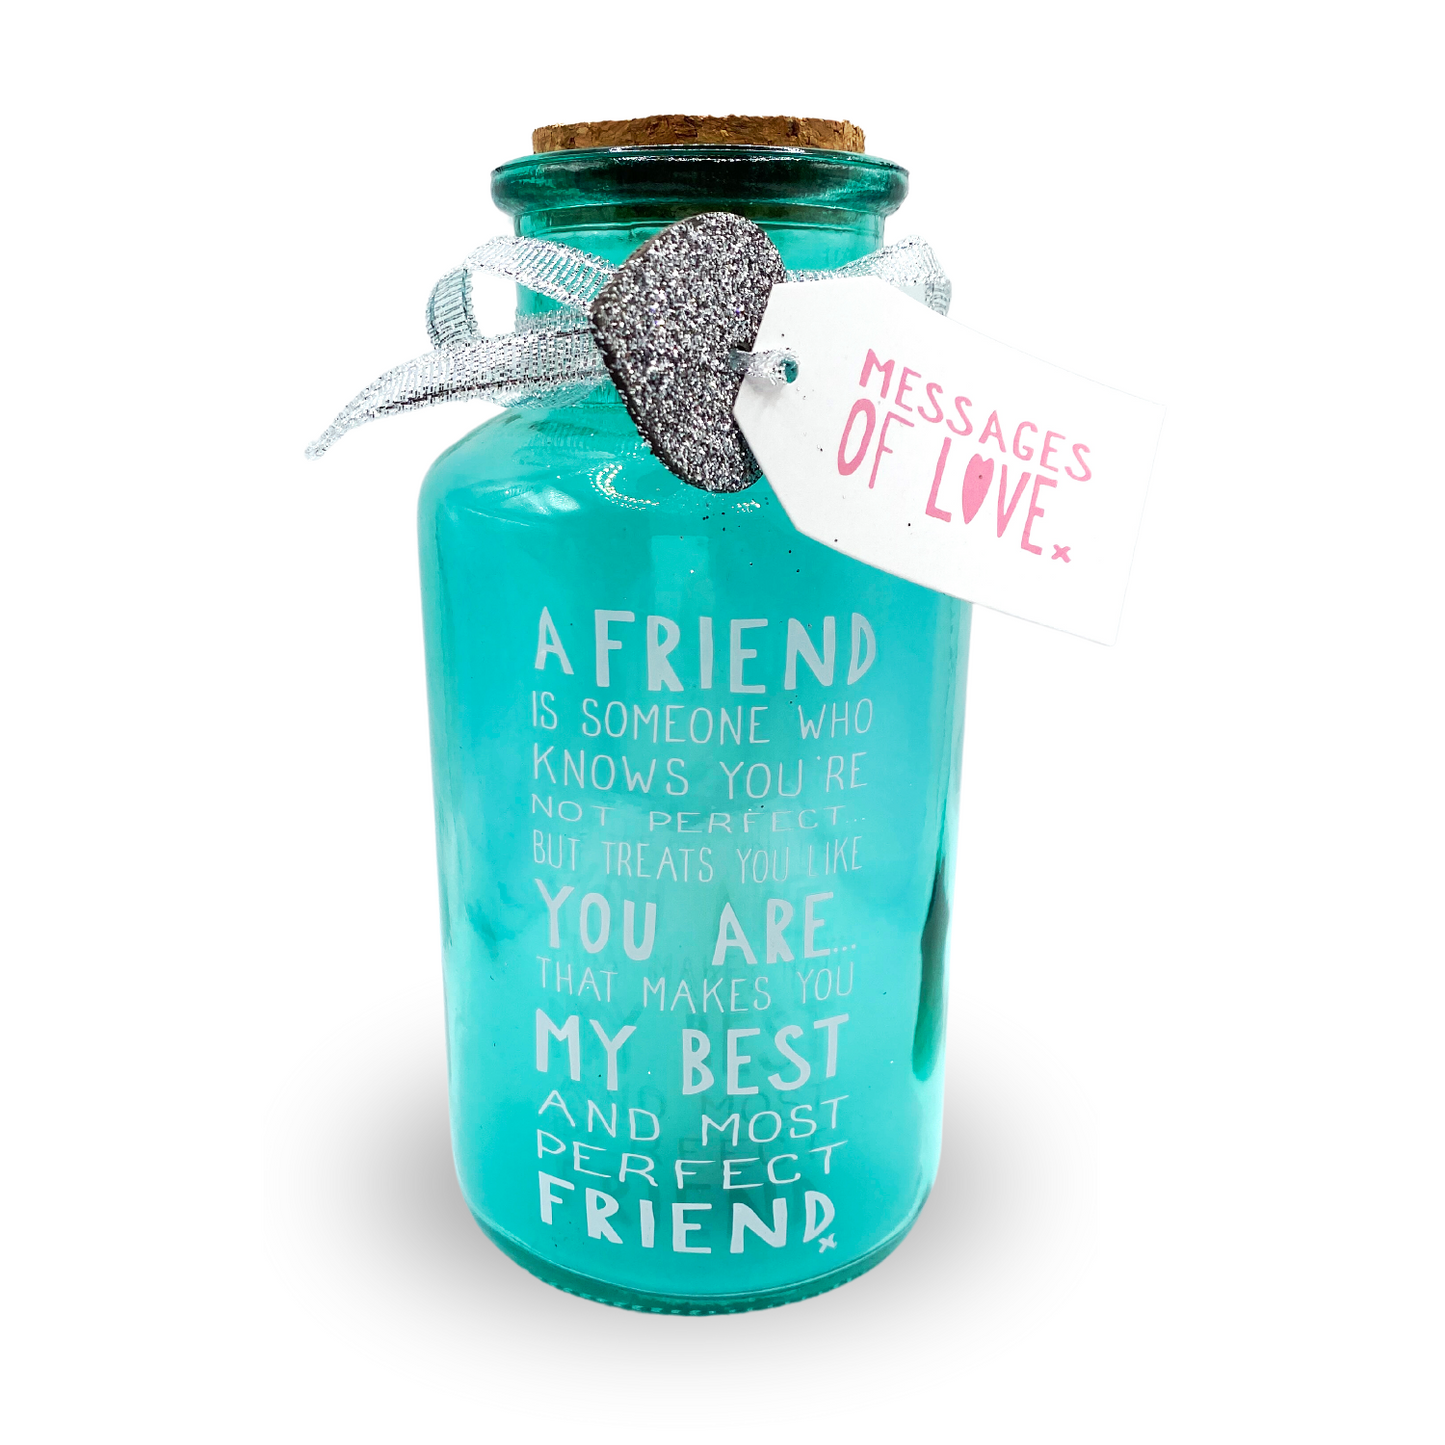 Perfect Friend Light Up Jar Messages Of Love Gift Range